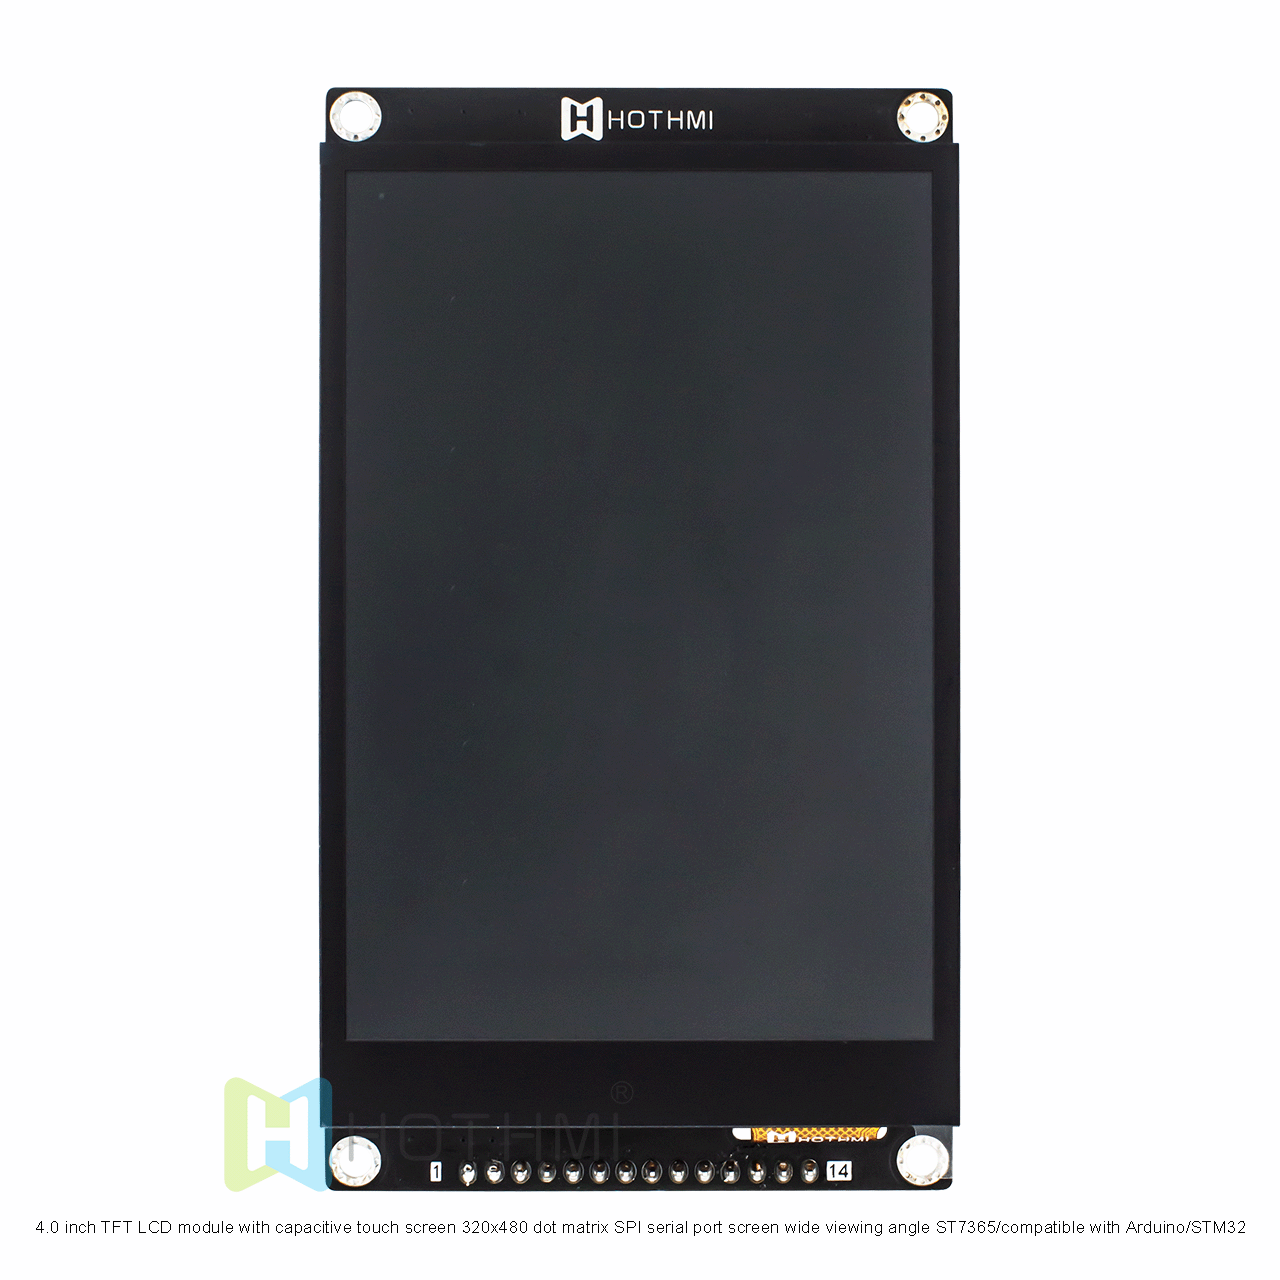 4.0 inch TFT LCD module with capacitive touch screen 320x480 dot matrix SPI serial port screen wide viewing angle ST7365/compatible with Arduino/STM32